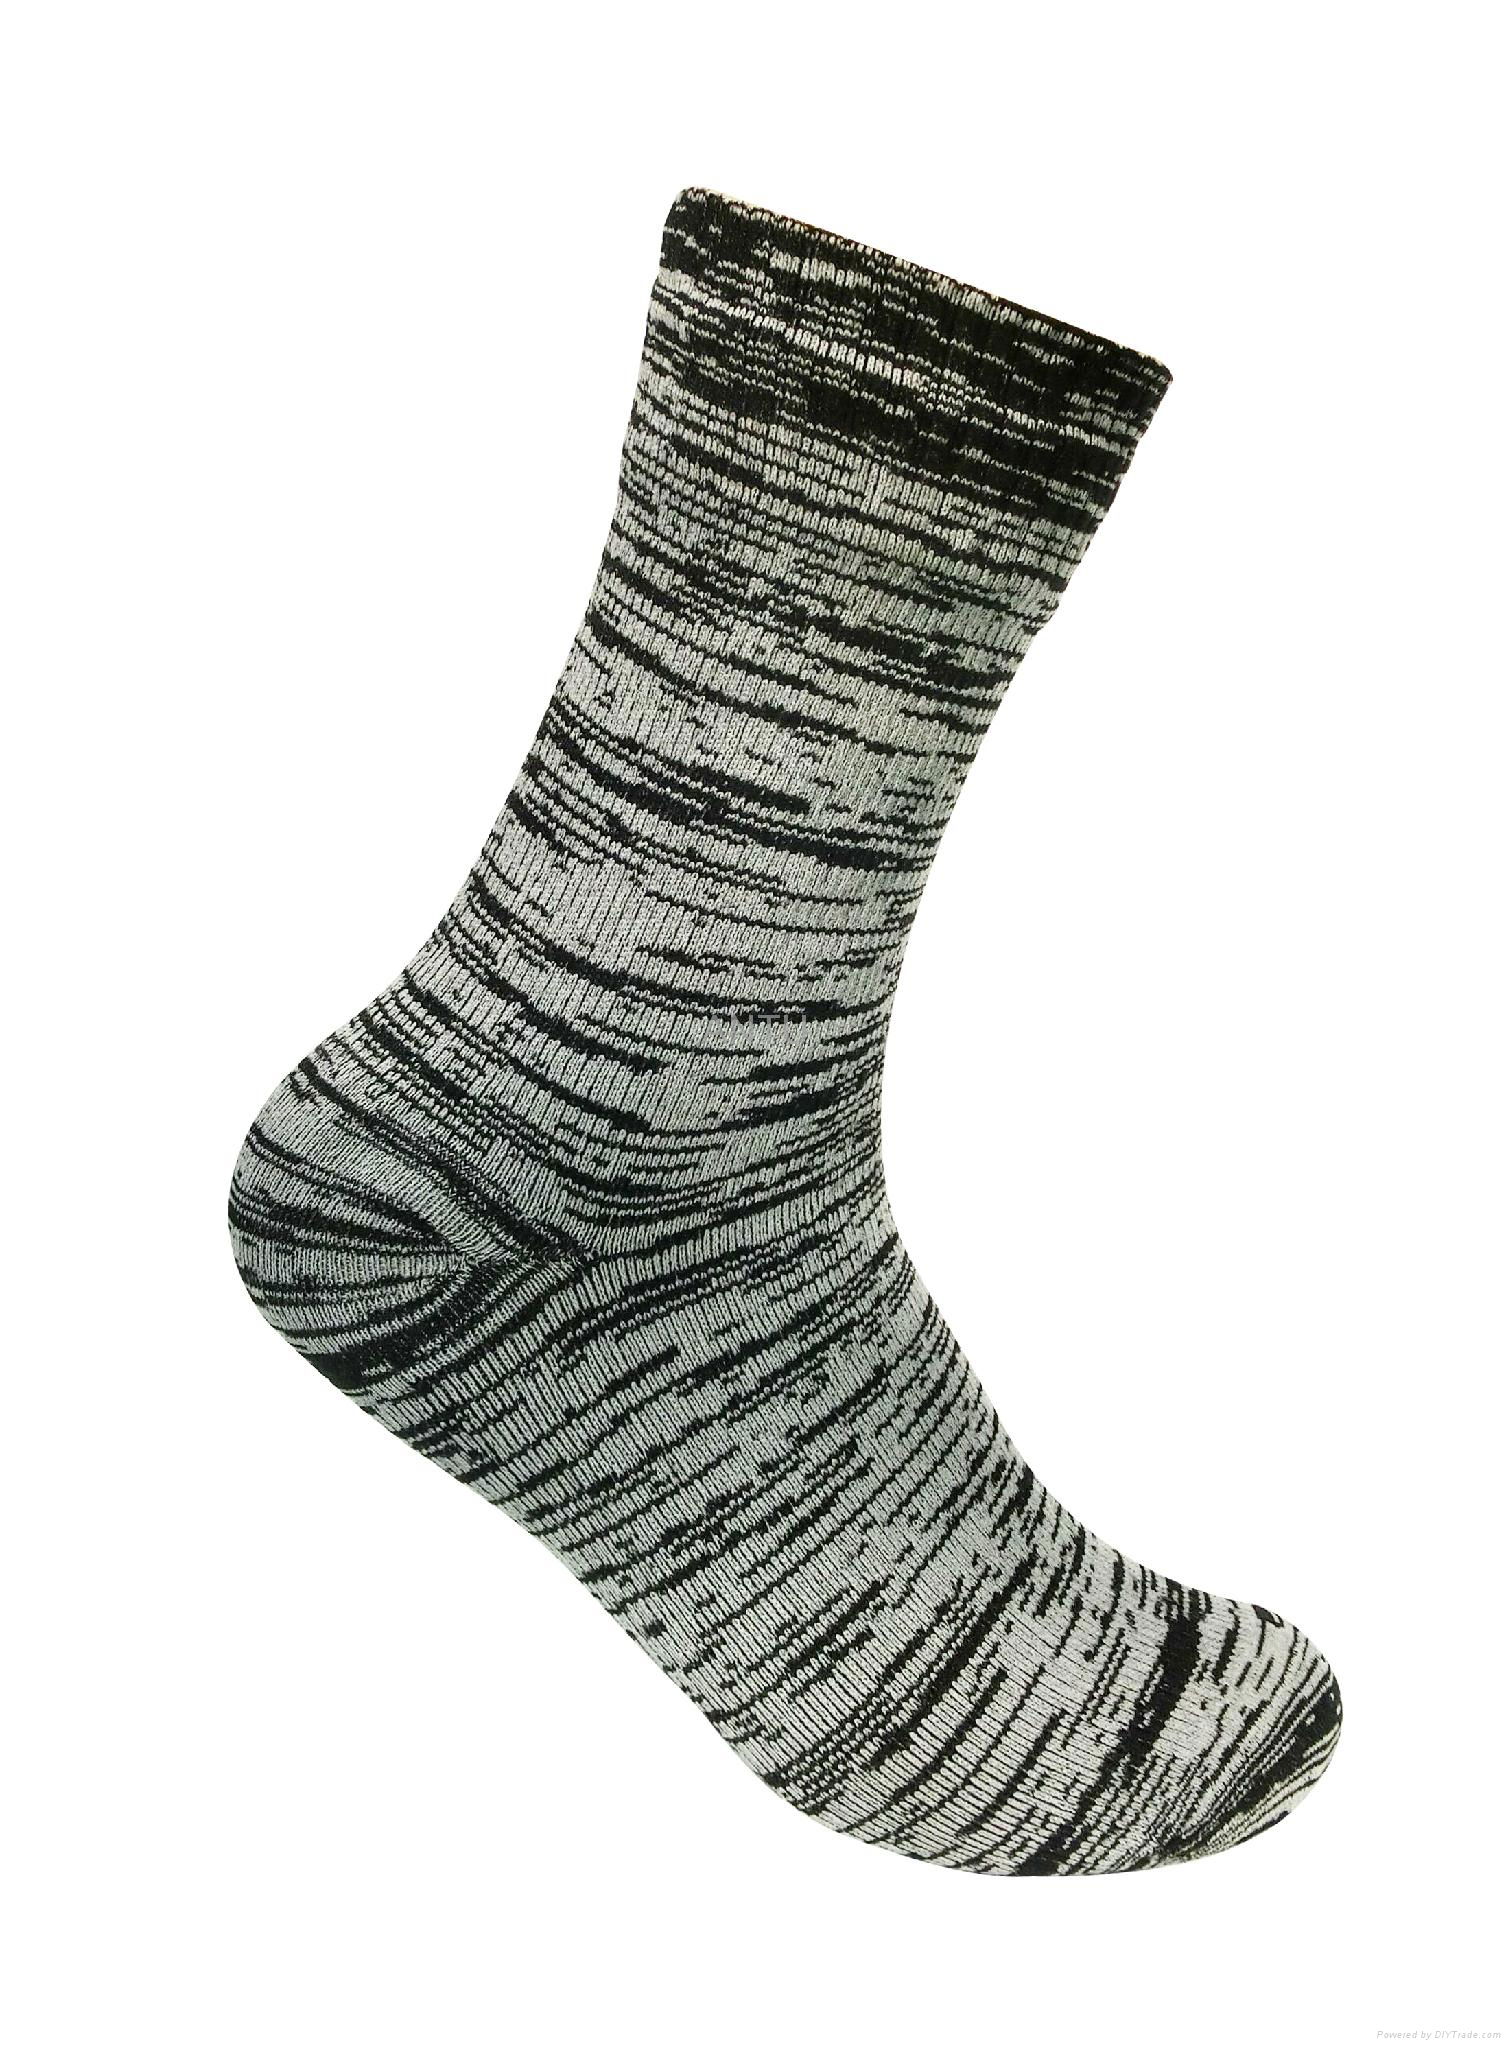 Waterproof and breathable sock - CY011 - ANTU (China Manufacturer ...